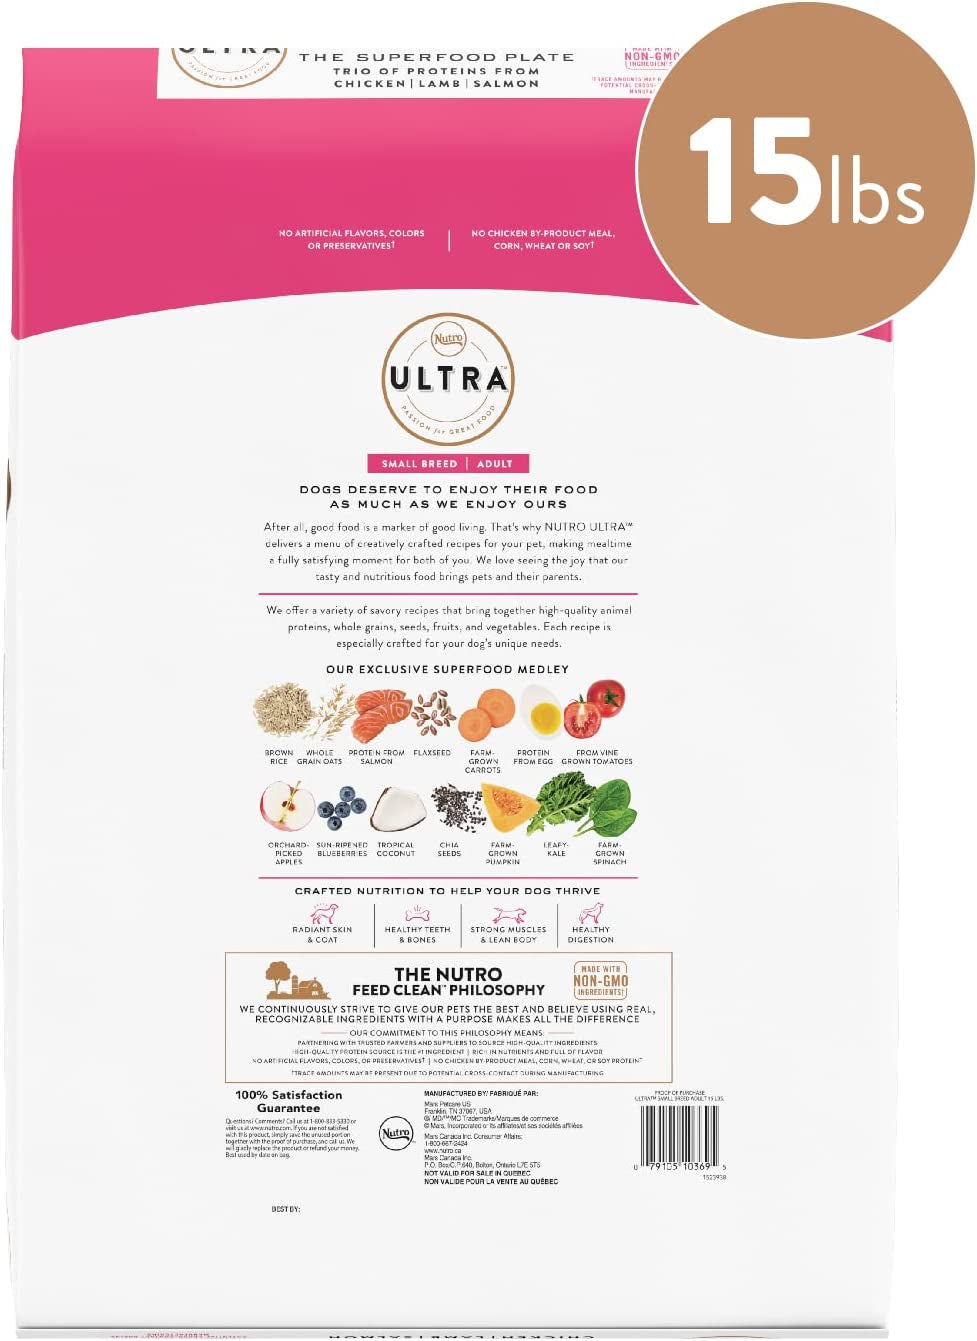 NUTRO ULTRA Adult Small Breed High Protein Natural Dry Dog Food with a Trio of Proteins from Chicken, Lamb and Salmon, 15 Lb. Bag